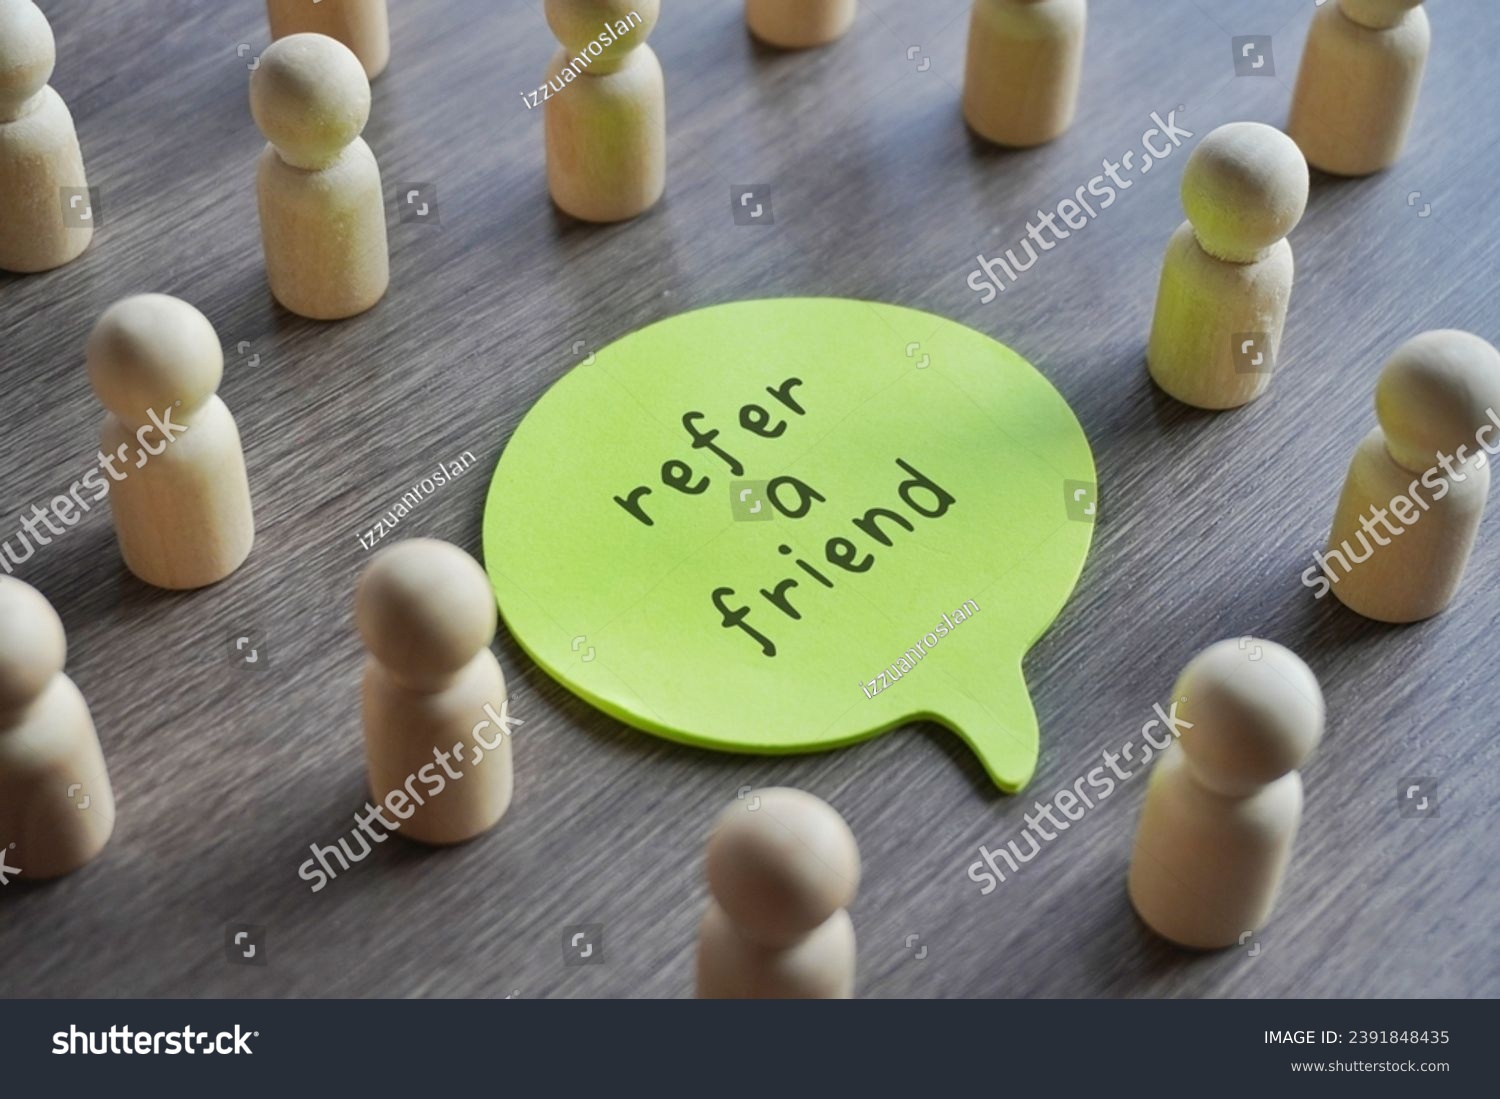 Closeup image of speech bubble with text REFER A FRIEND surrounded by a group of wooden dolls.  #2391848435